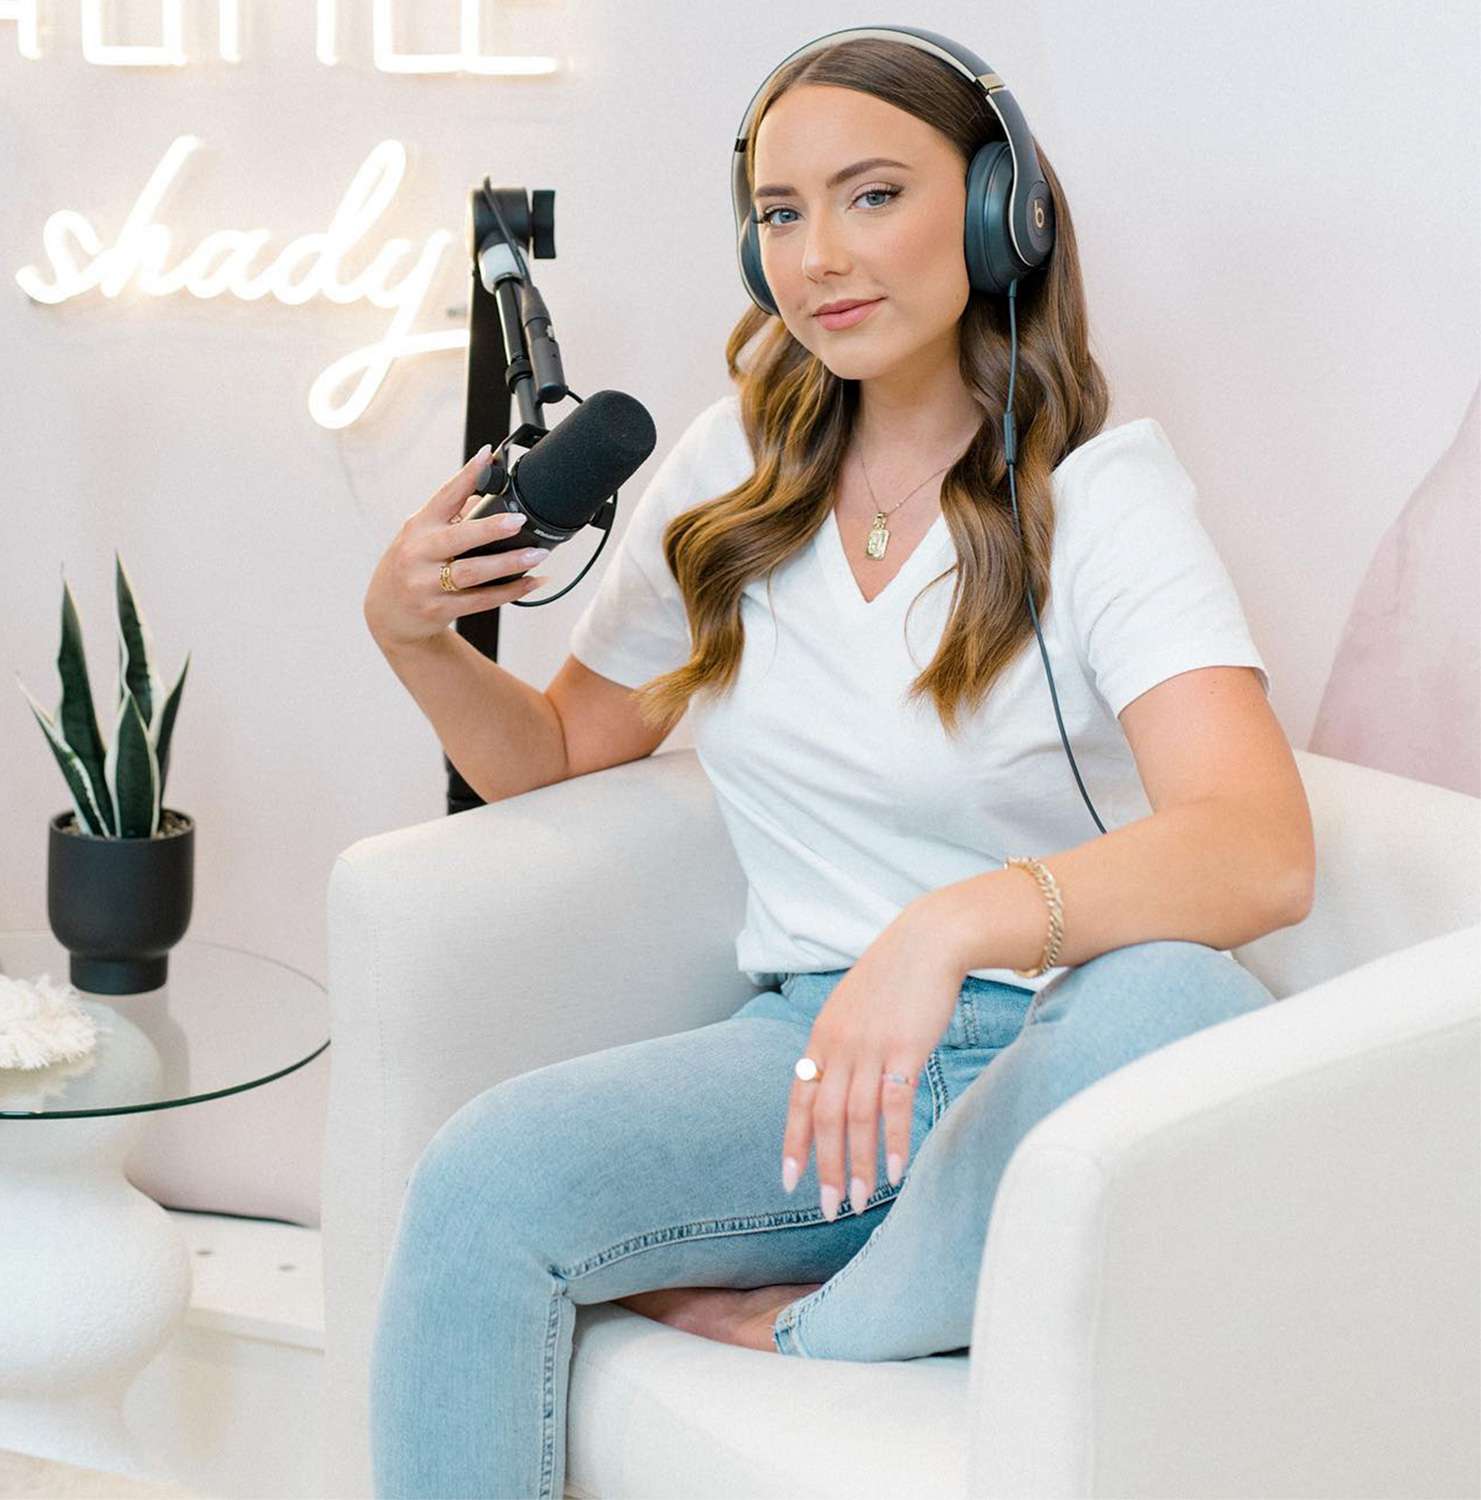 Eminem’s Daughter Hailie Jade Is ‘Excited’ to Launch Her New Podcast Just a Little Shady